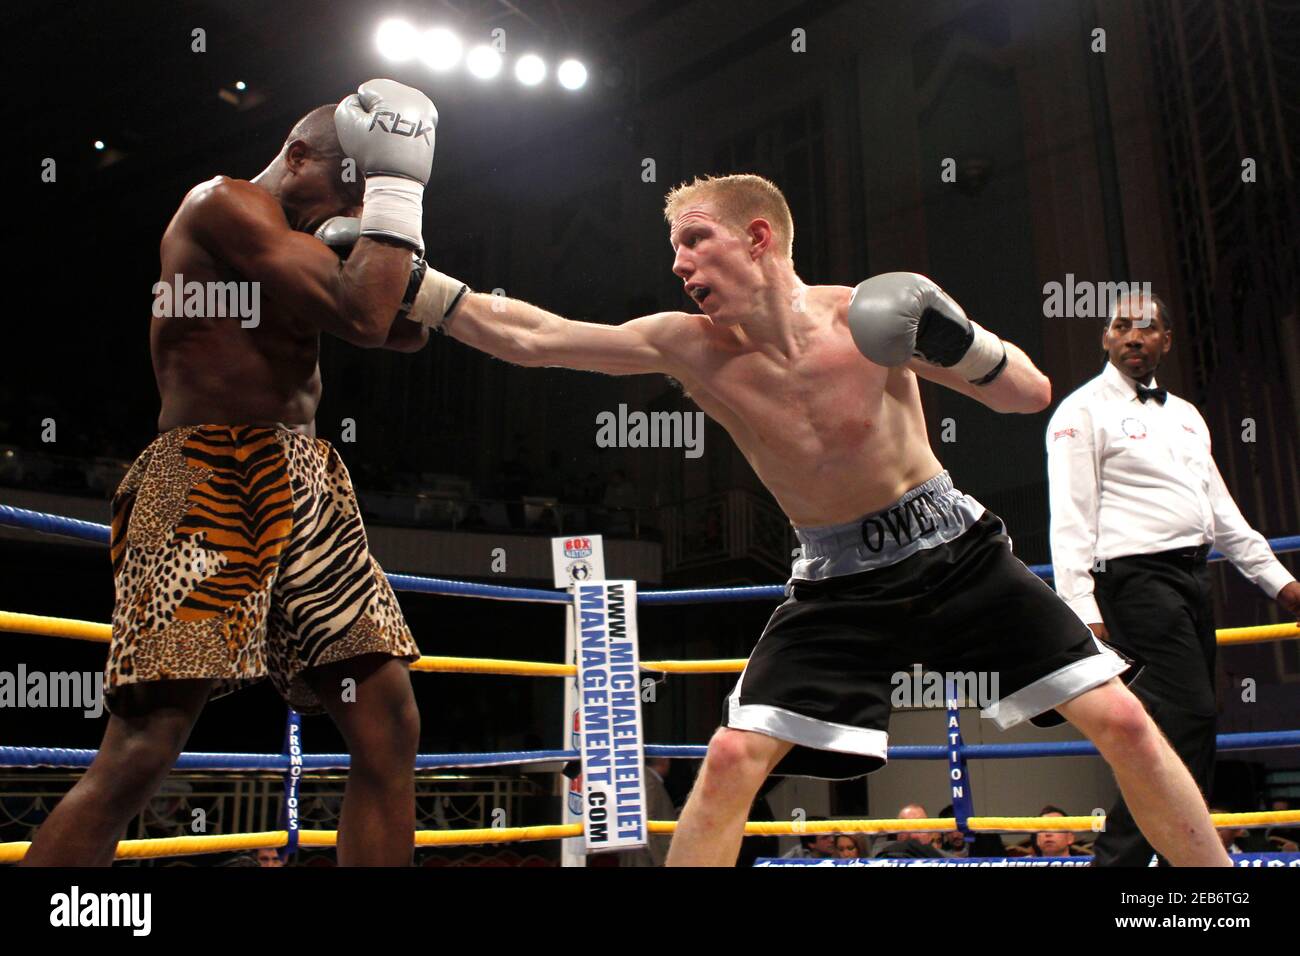 Boxing - Lee Owen v Bheki Moyo- Welterweight - Troxy, London - 2/3/12 Lee  Owen (R) in action against Bheki Moyo Mandatory Credit: Action Images / Jed  Leicester Stock Photo - Alamy